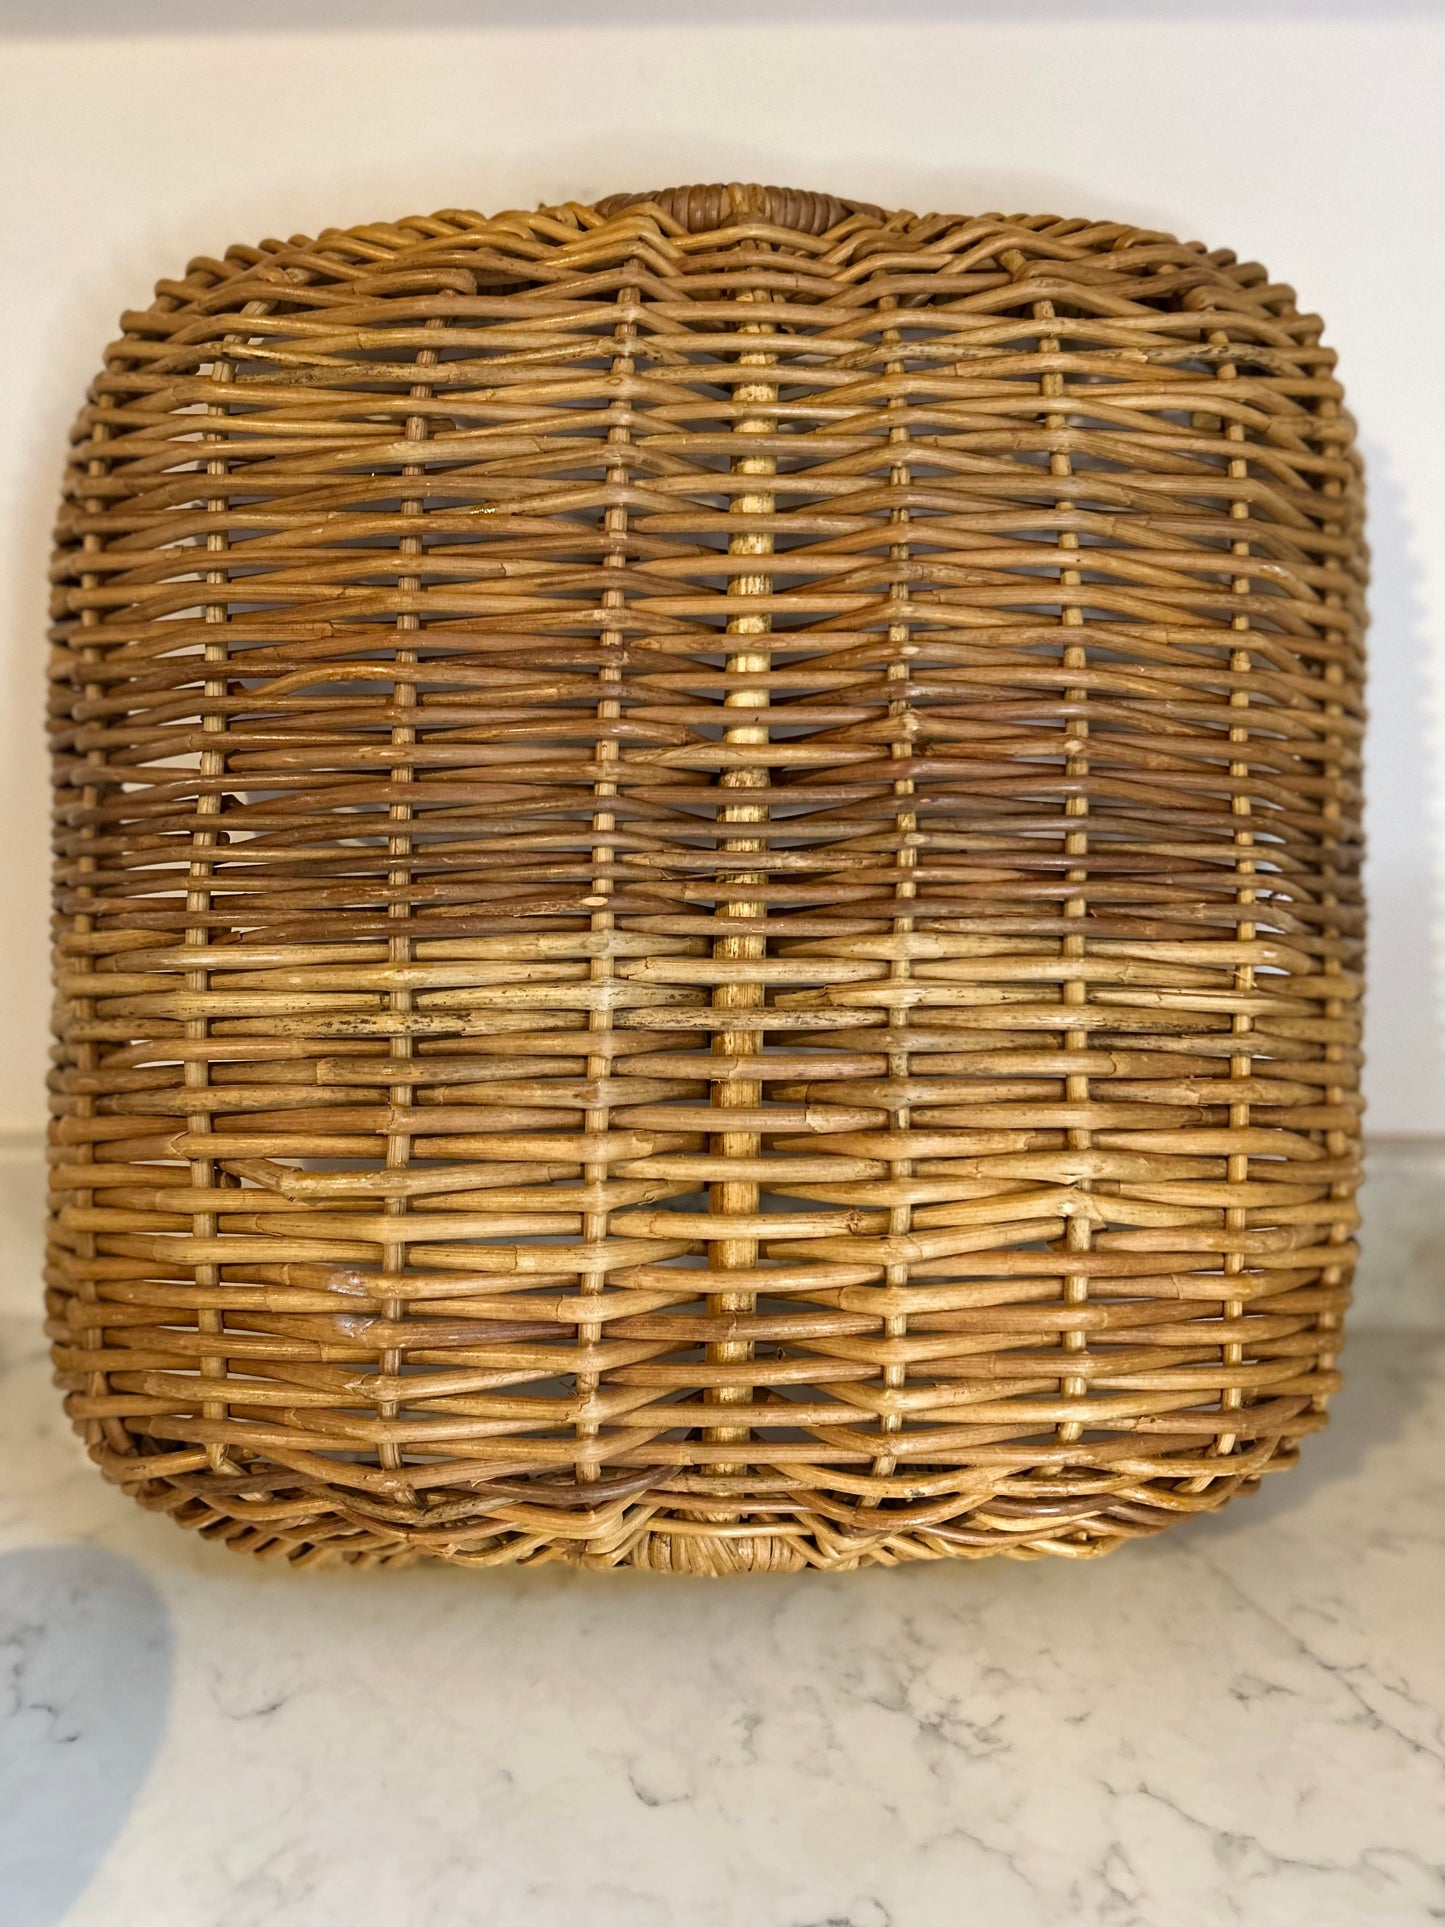 Vintage Wicker French Bread/Storage Basket with handles